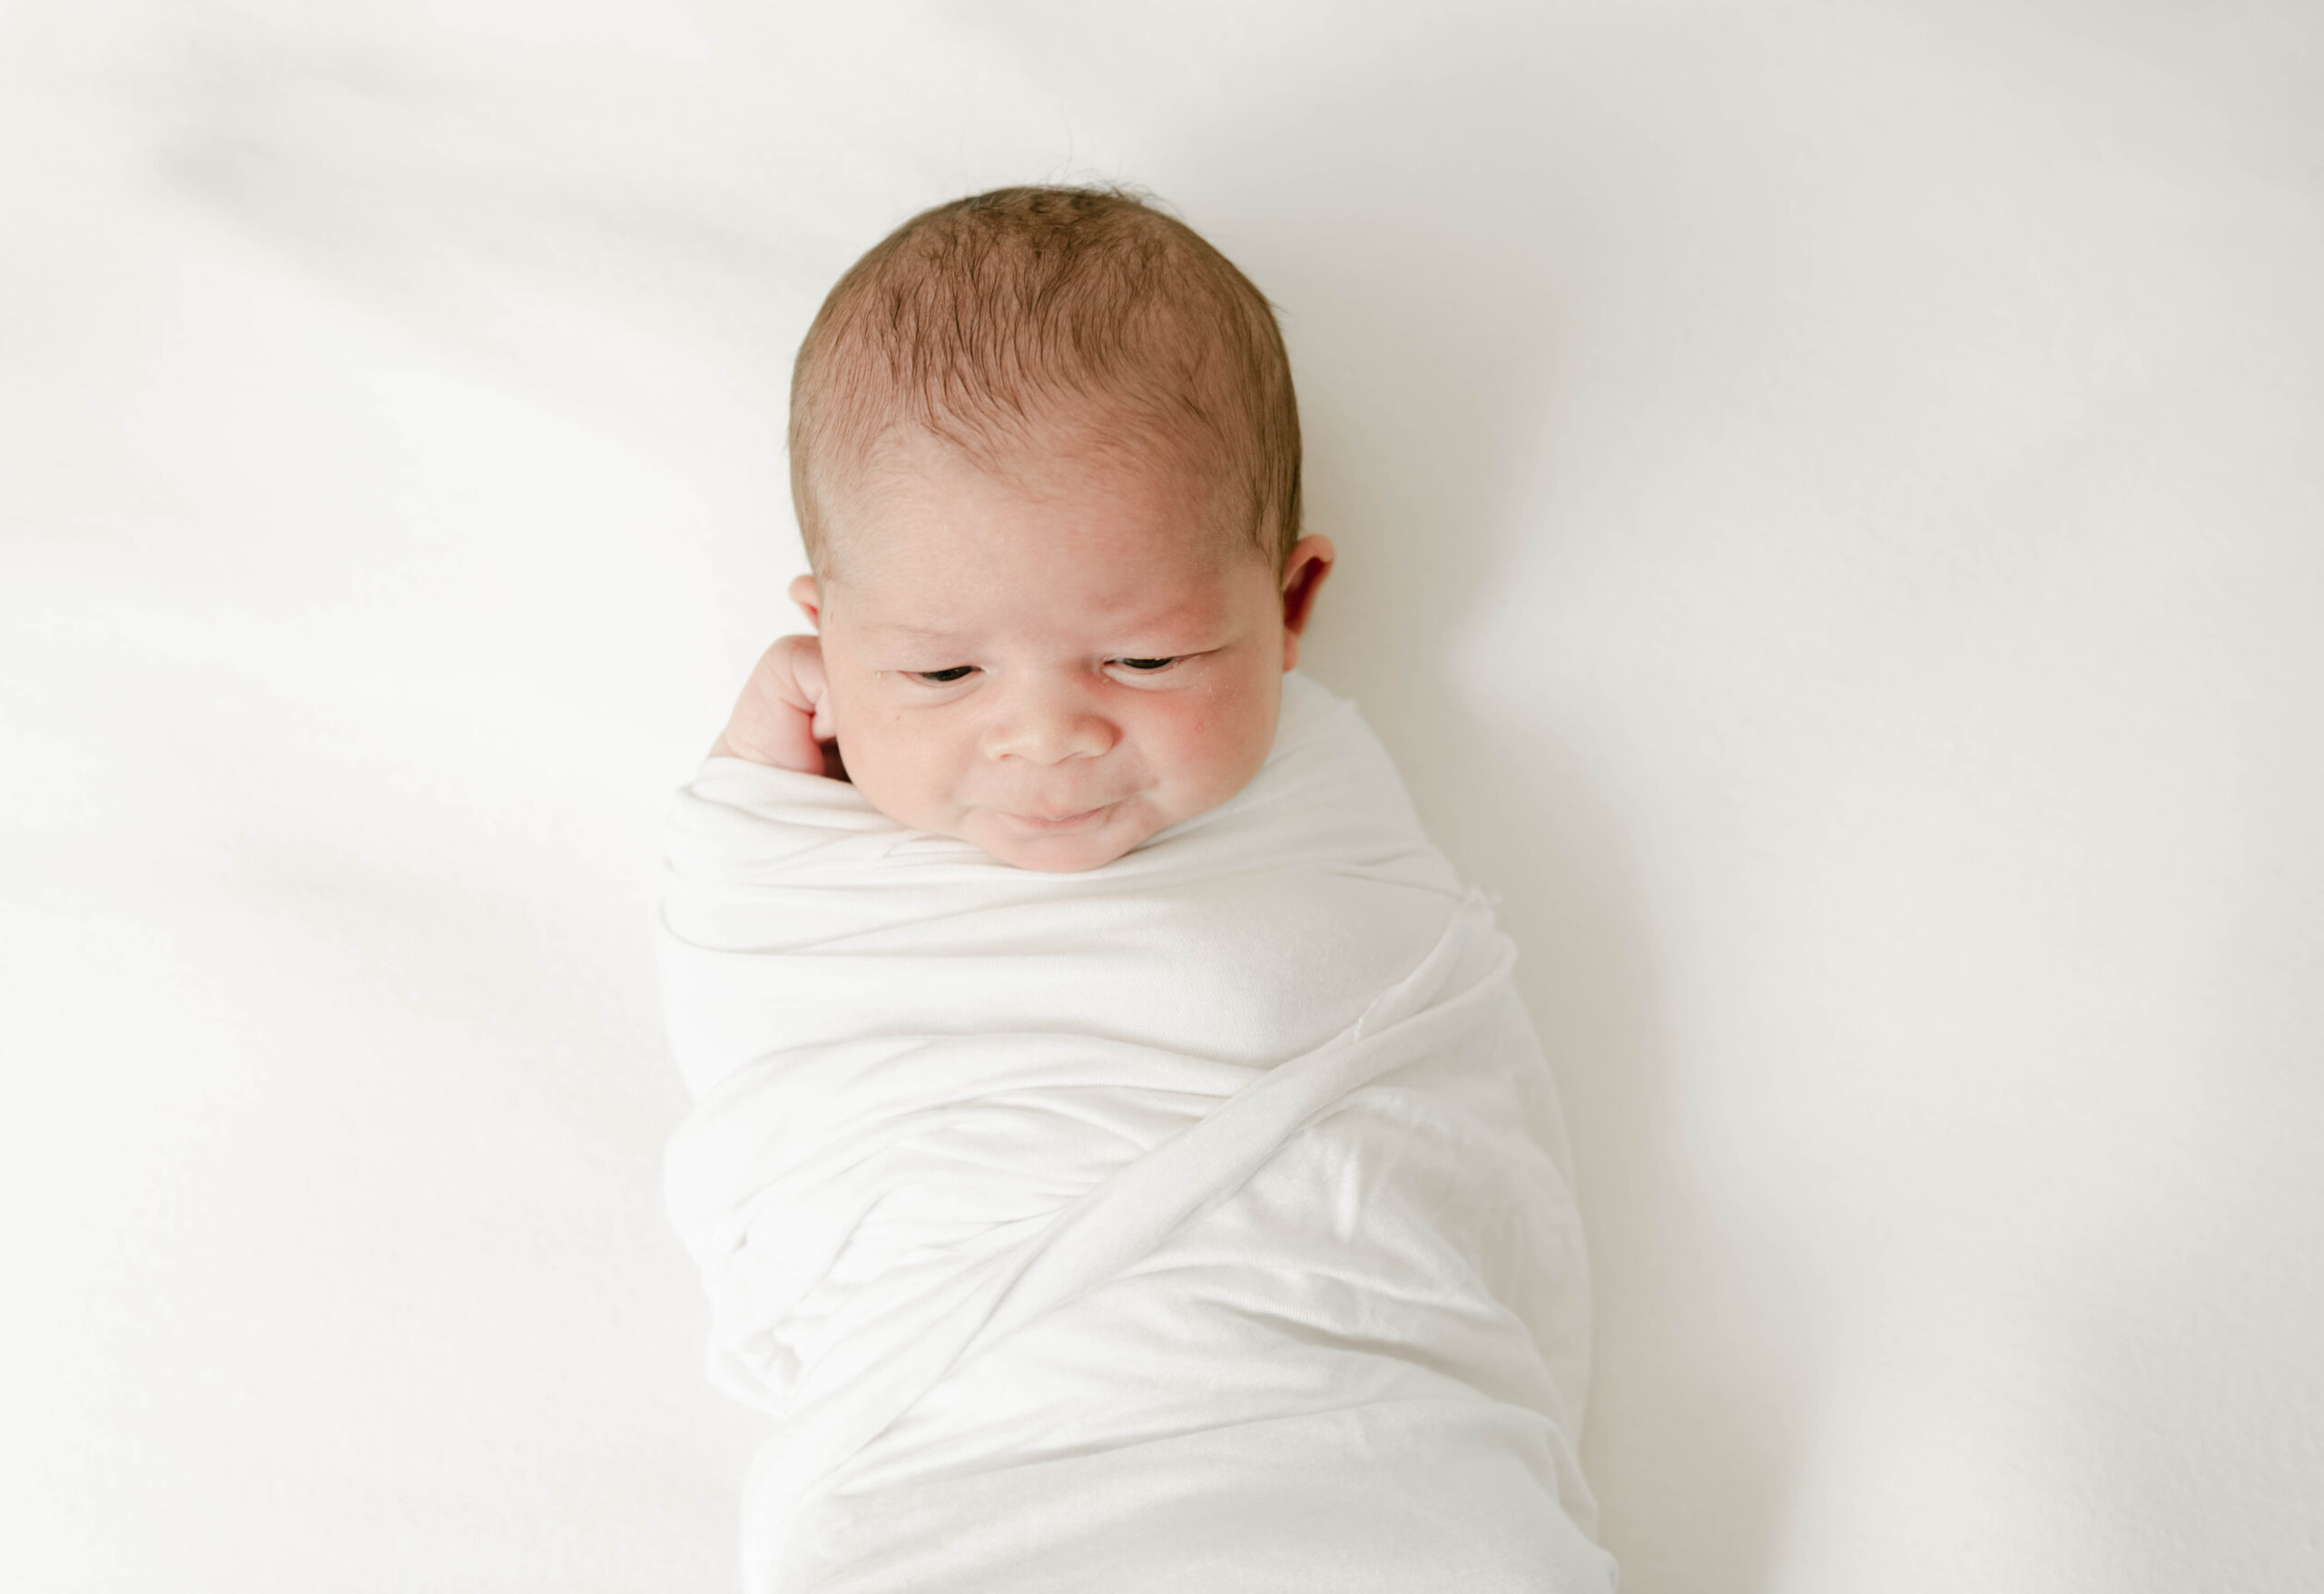 A newborn baby lays on a white bed in a white swaddle with eyes open